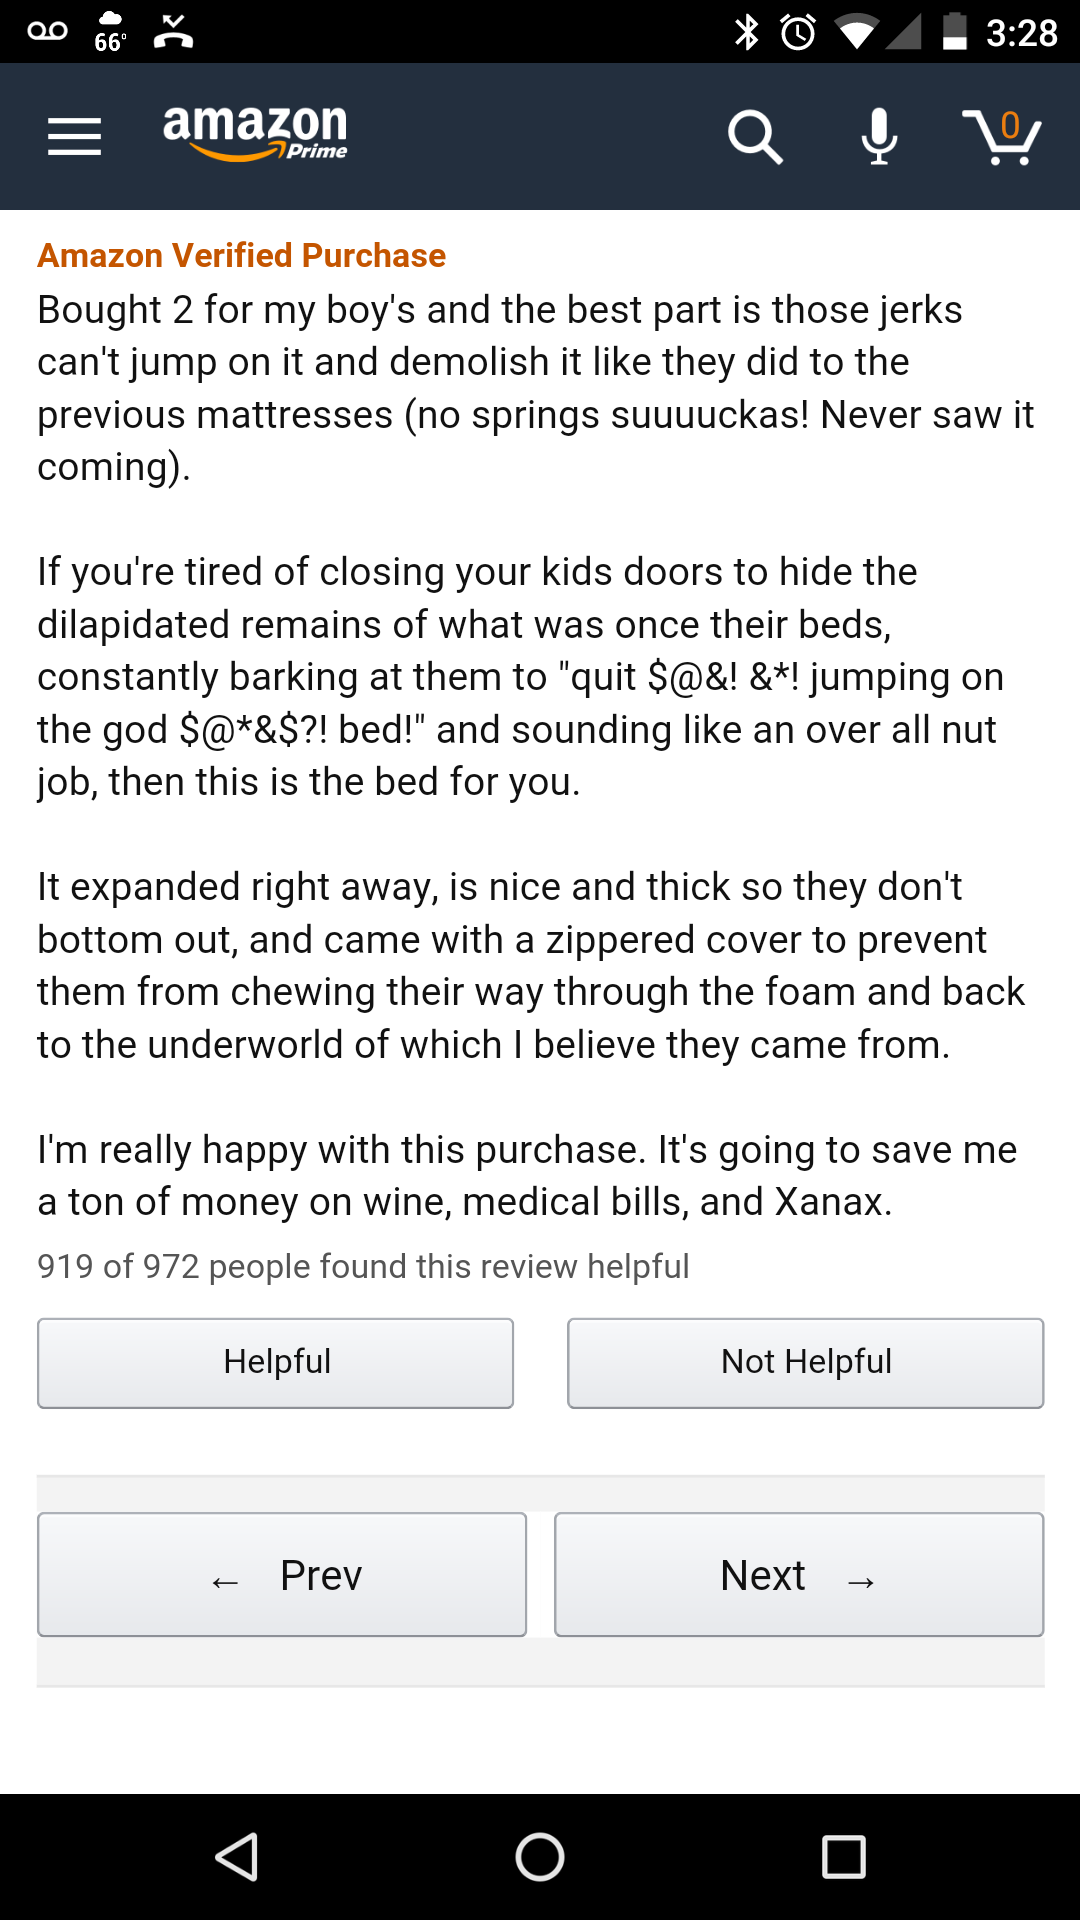 Came across this Amazon mattress review.